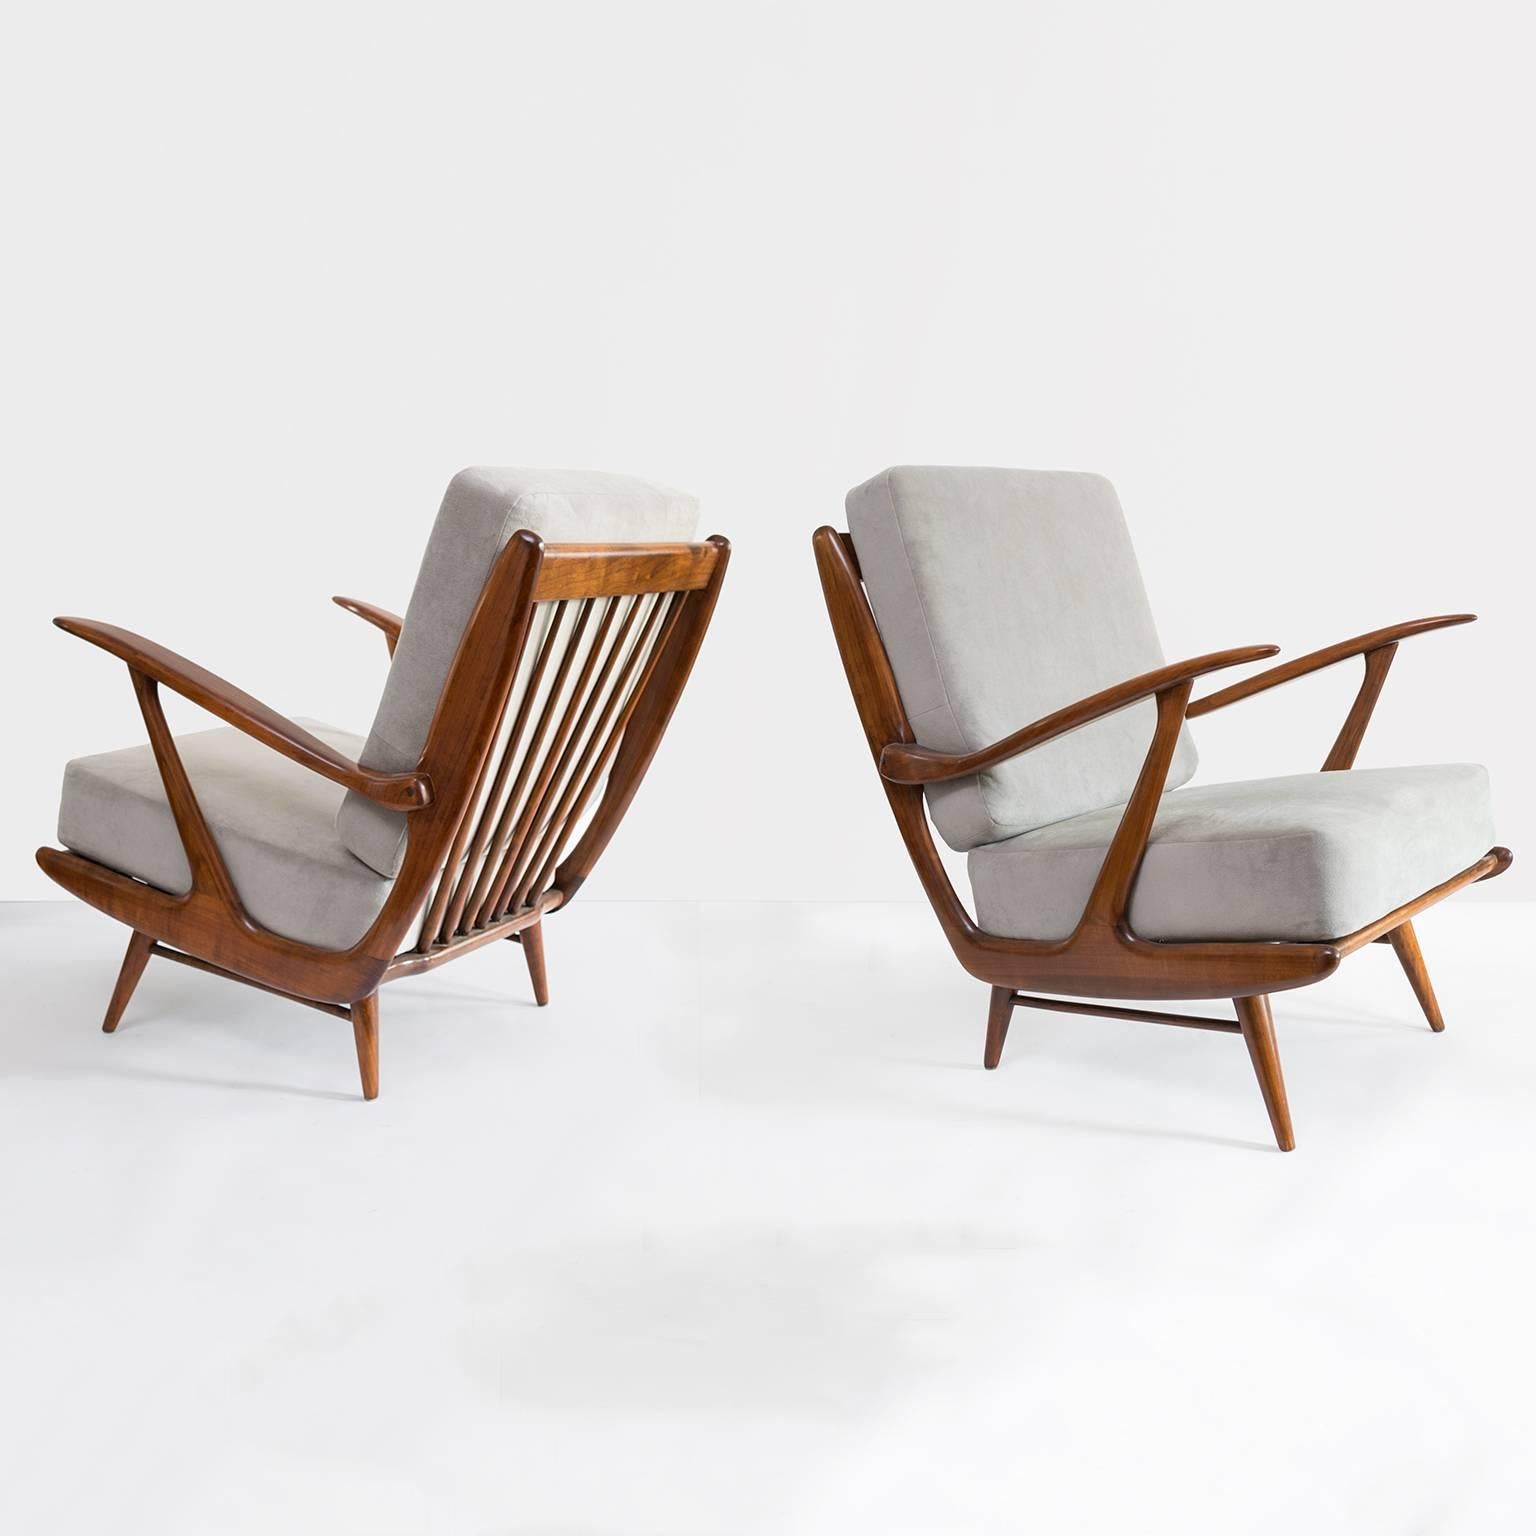 Dutch Mid-Century Modern lounge chairs carved and stained fruitwood armchairs. Chairs have newly restored frames and light gray velvet upholstered cushions. Made by B. Spuij's, Holland, 1950s.